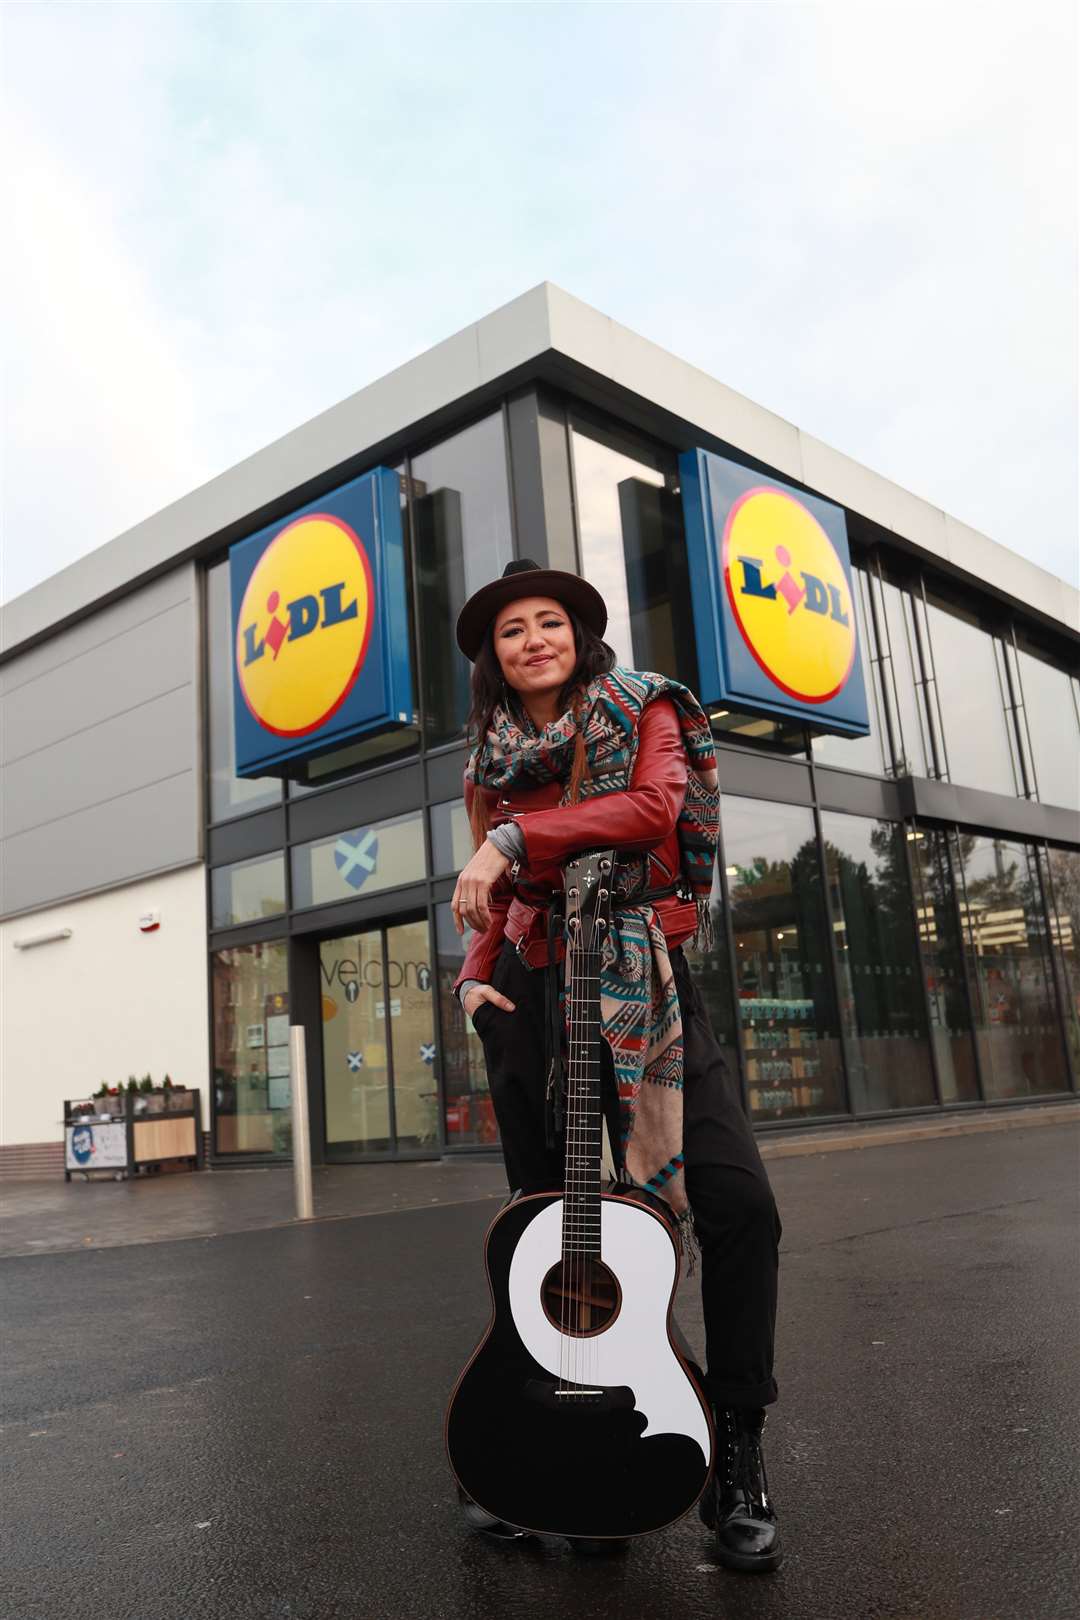 KT Tunstall has promoted Lidl's 100th store opening with a series of concerts including a recent gig in Aberdeen.